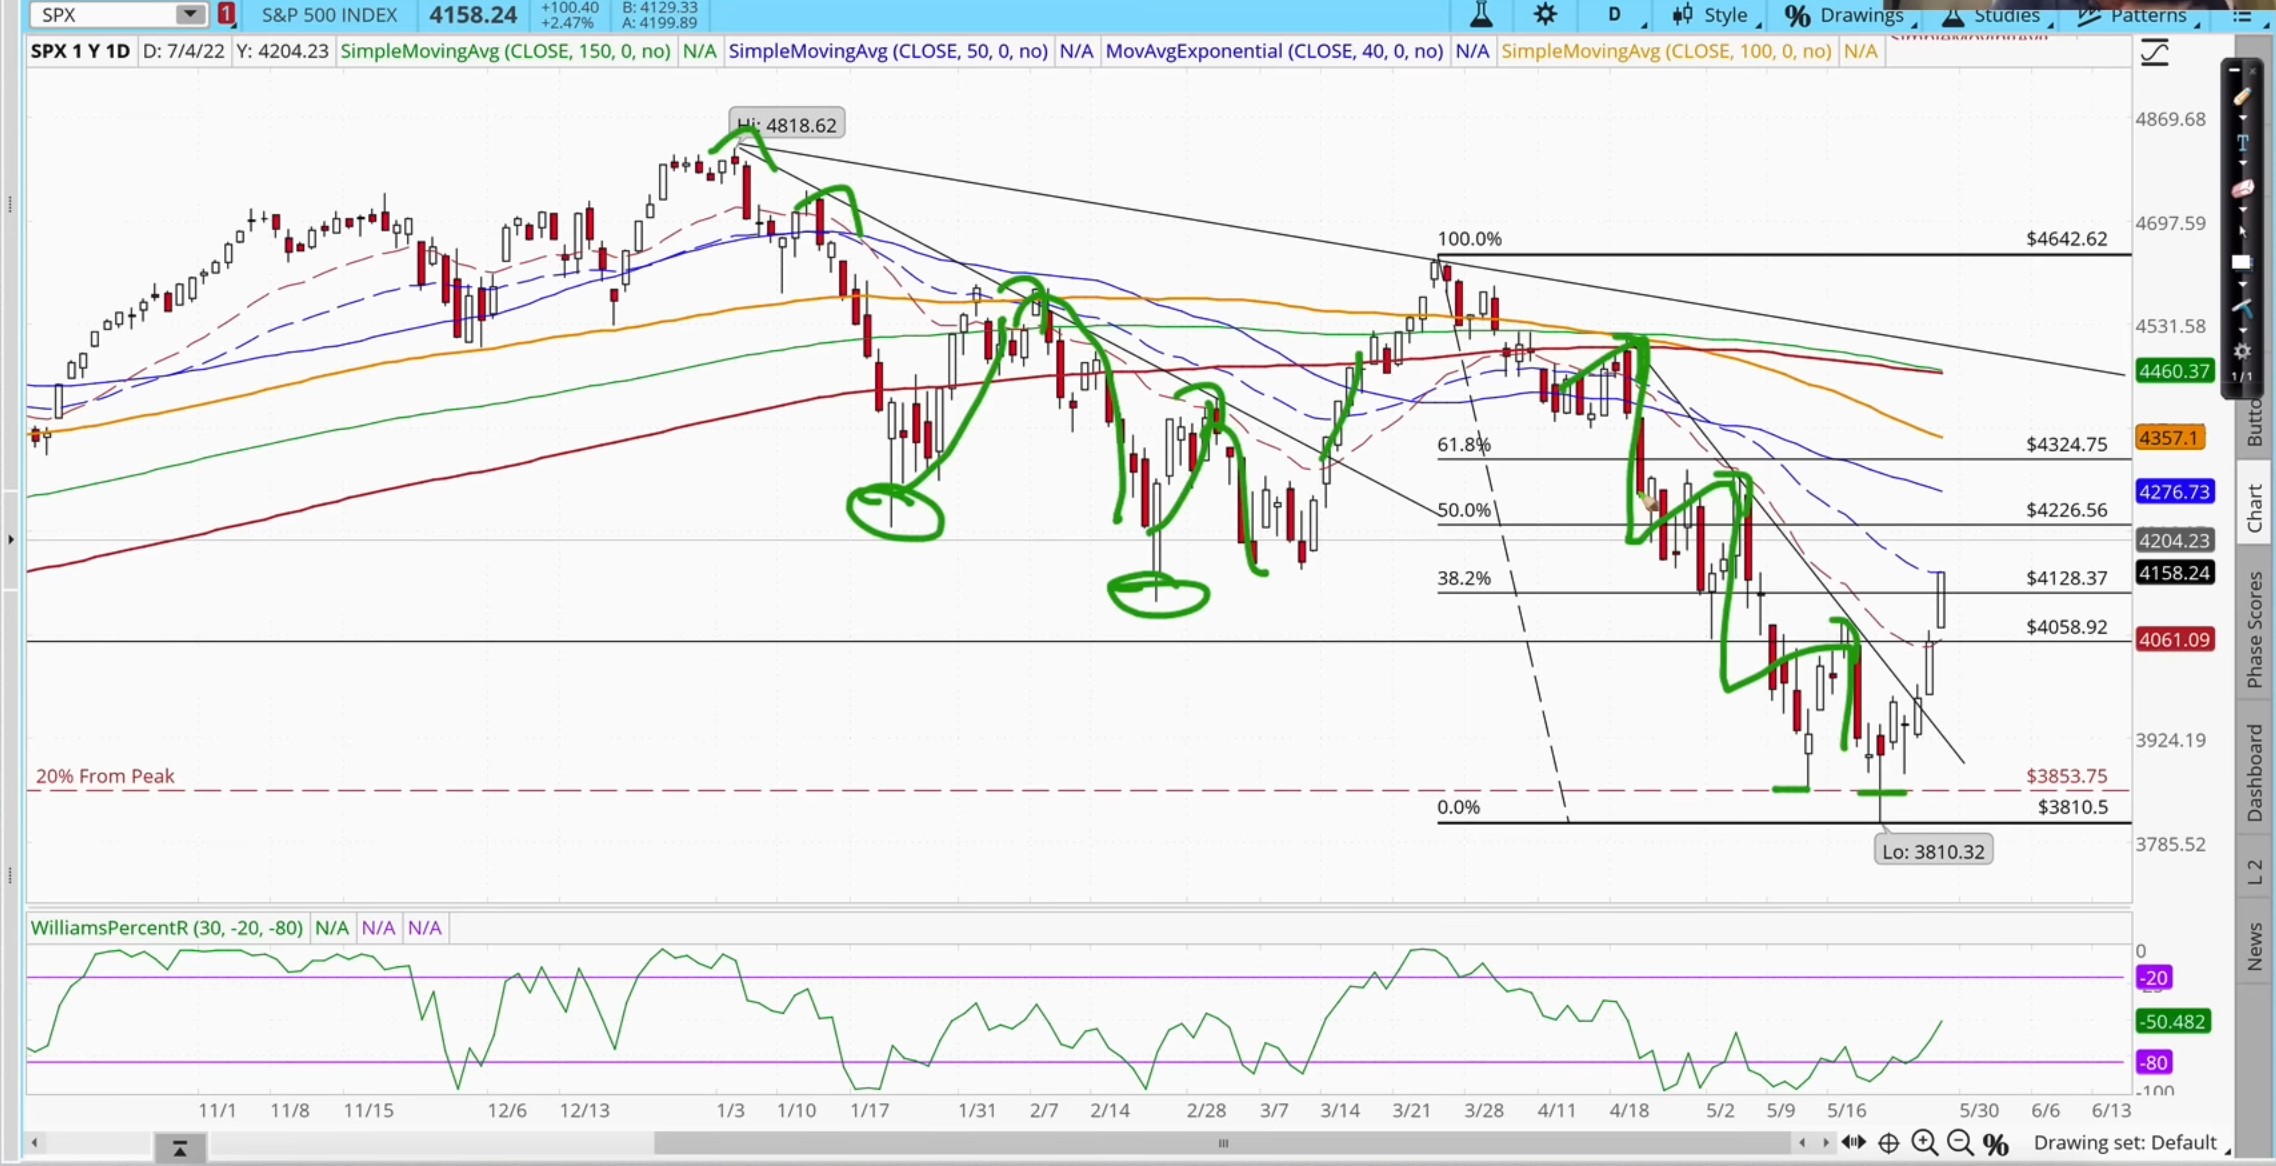 4-21 SPX daily chart